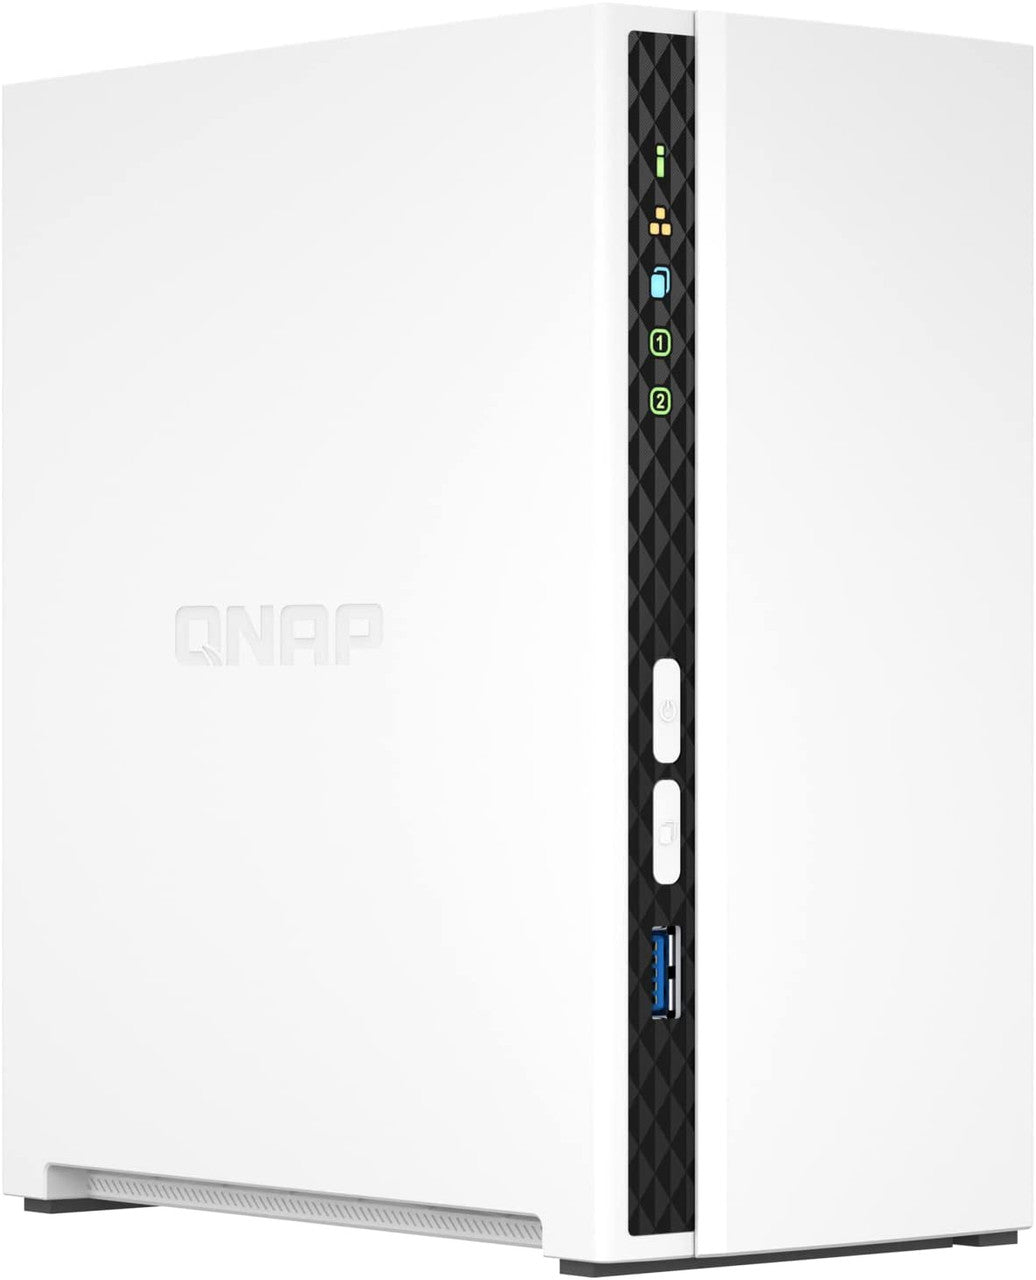 QNAP TS-233 2-Bay Desktop NAS with a 4TB (2 x 2TB) of Seagate Ironwolf NAS Drives Fully Assembled and Tested